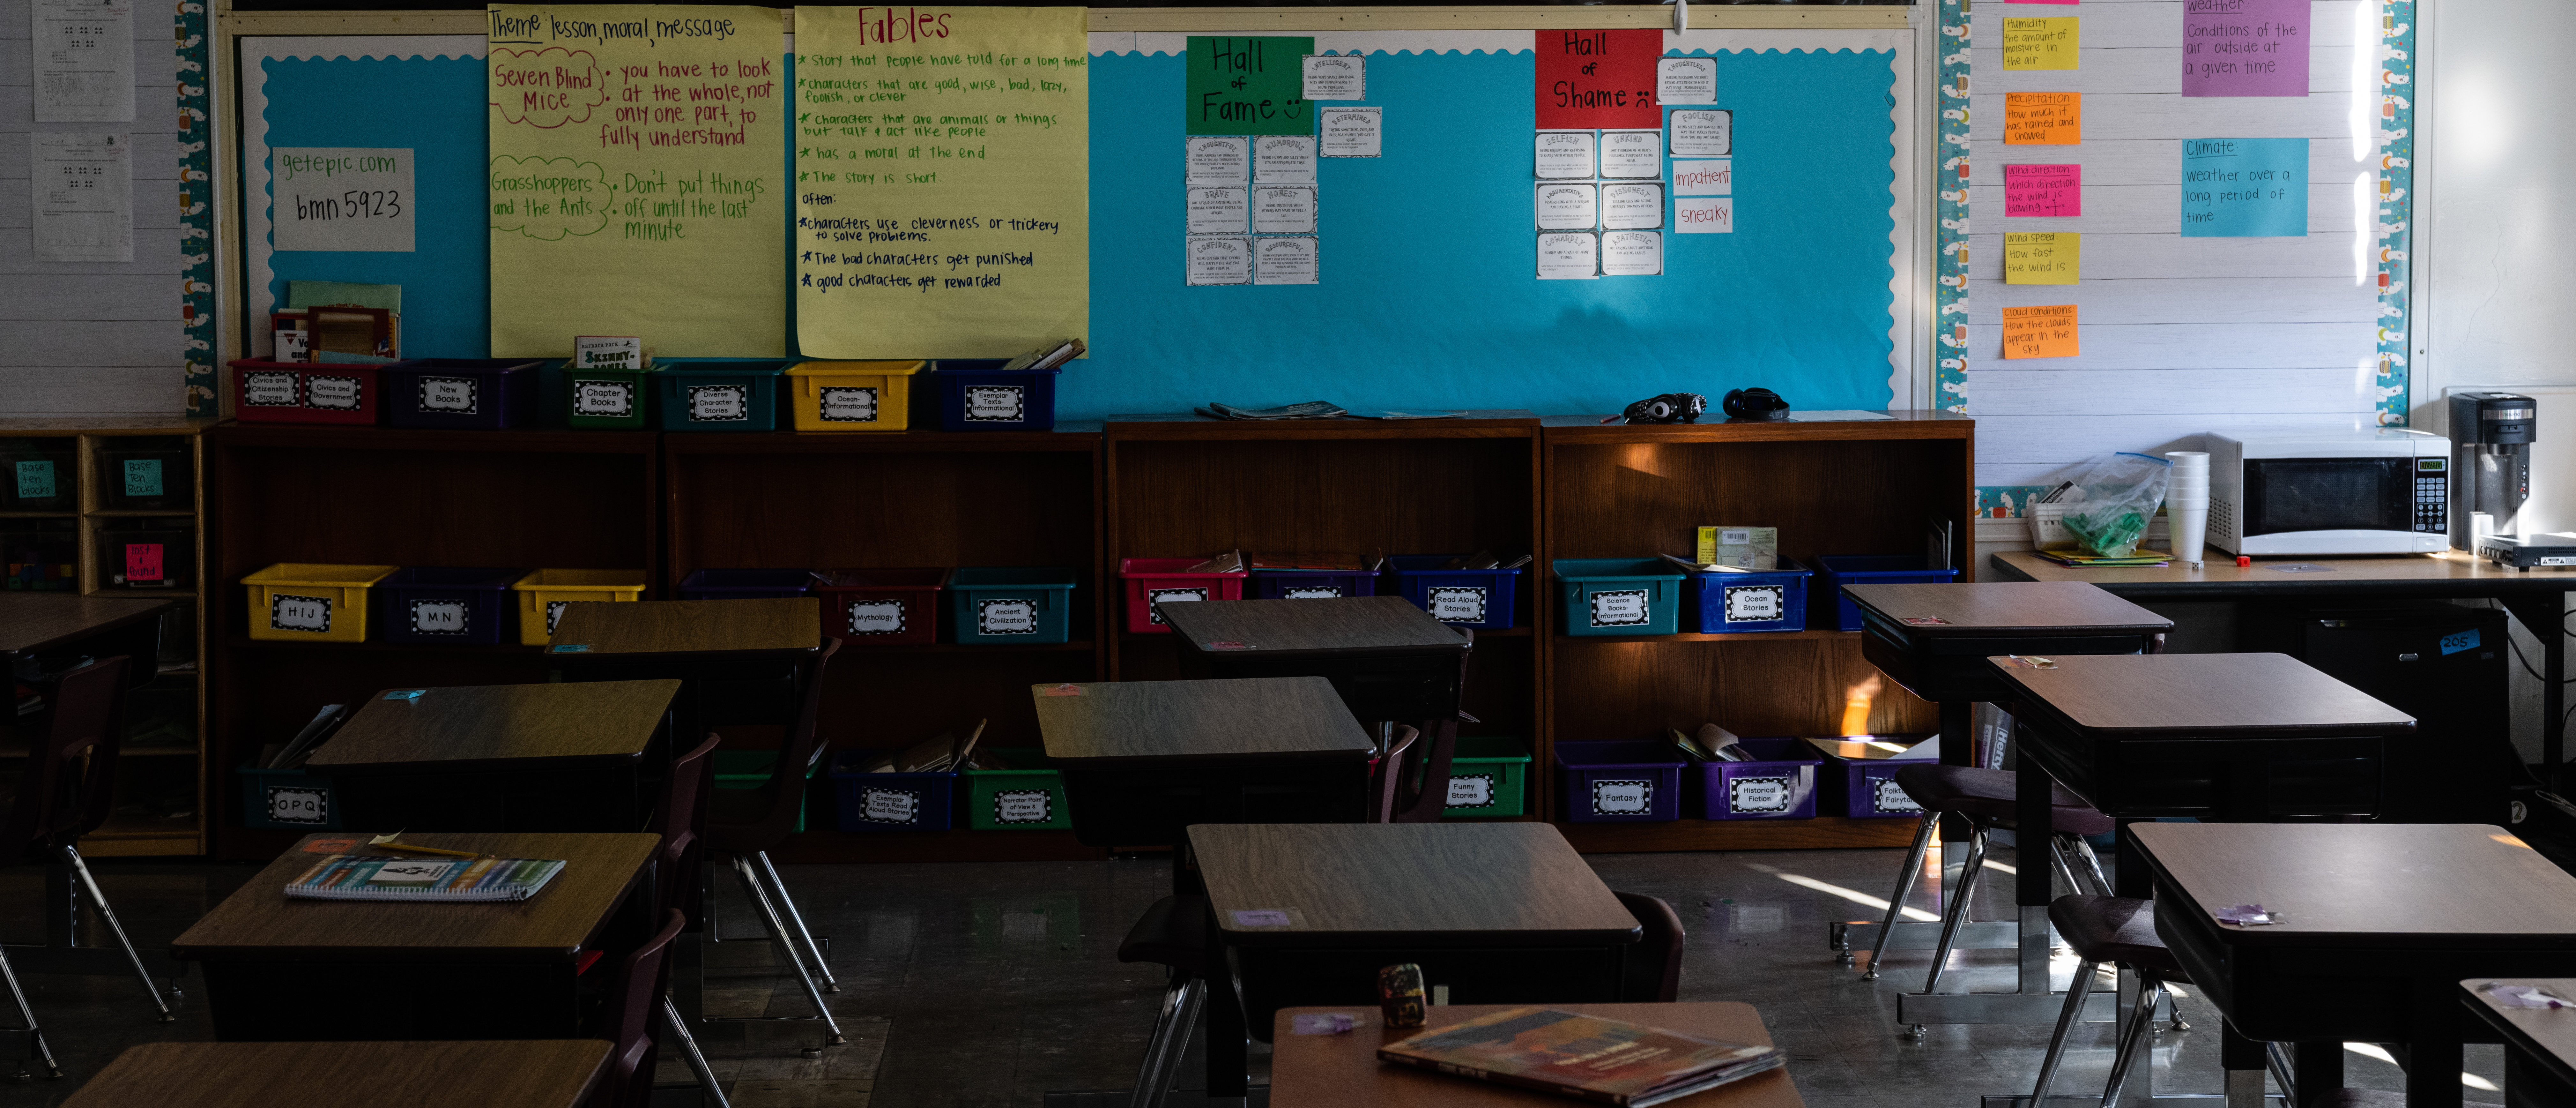 LOUISVILLE, KY - JANUARY 11: Unused desks and cubbies in empty classroom are seen during a period of Non-Traditional Instruction (NTI) at Hazelwood Elementary School on January 11, 2022 in Louisville, Kentucky. (Photo by Jon Cherry/Getty Images)